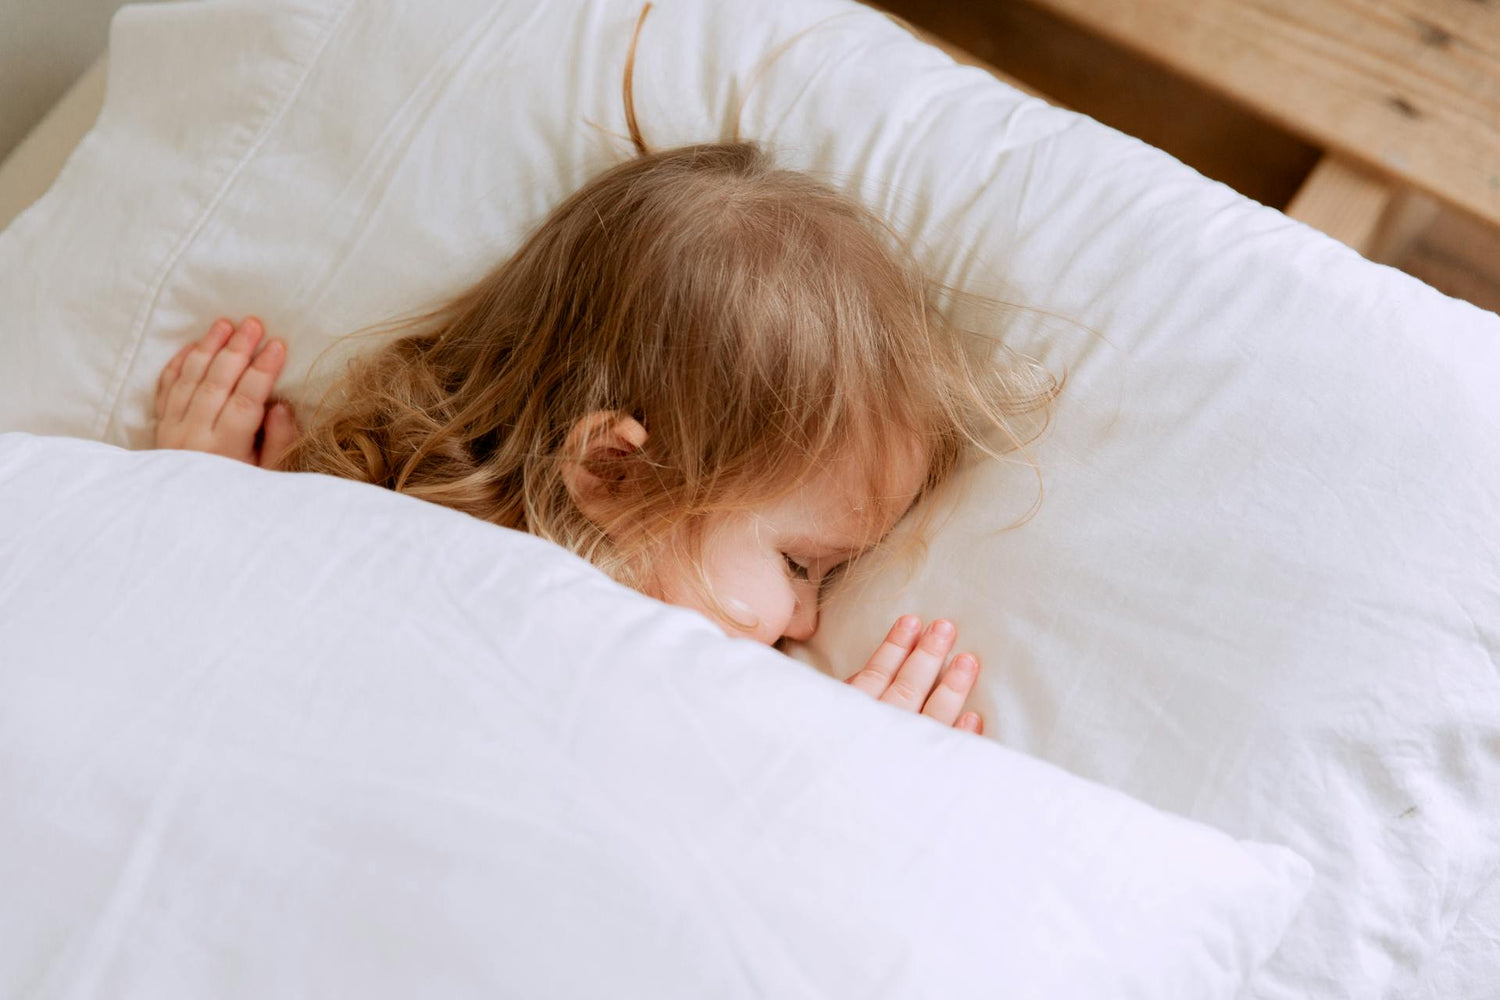 Top 10 Tips for Selecting the Perfect Children's Mattress in Australia